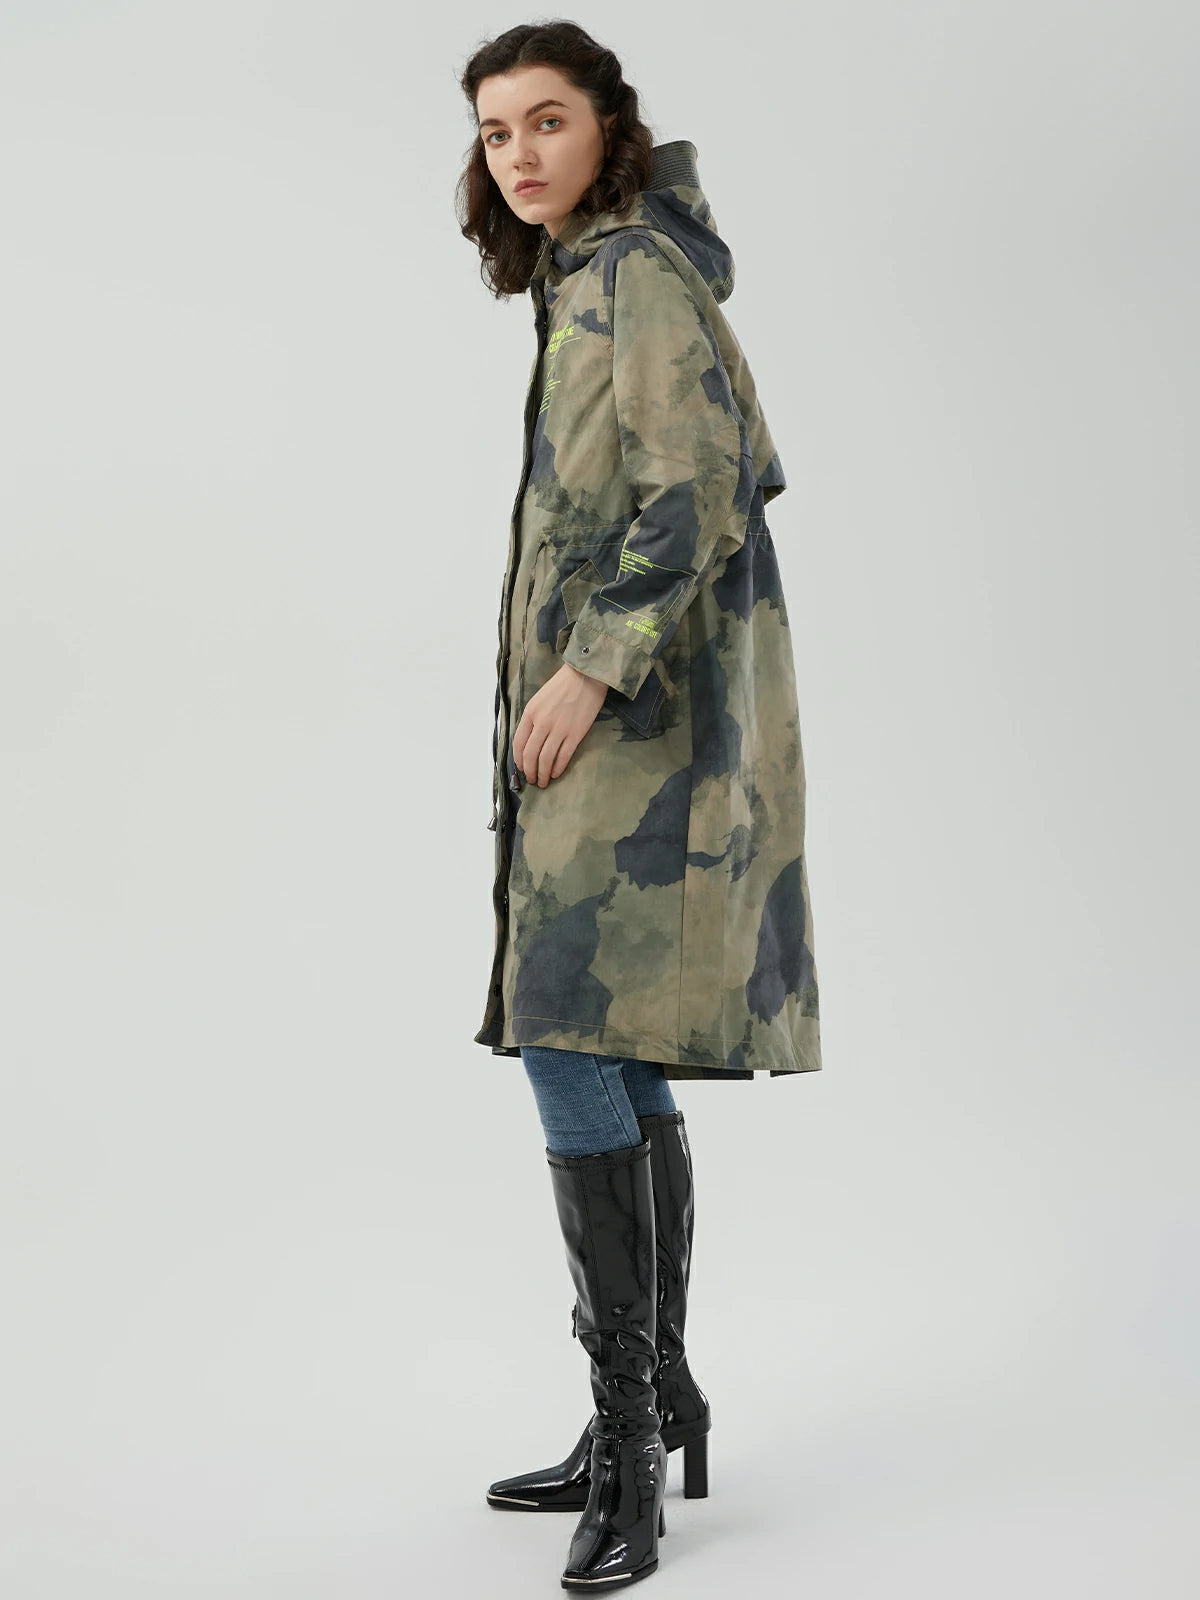 Loose-fit, long trench coat featuring a waist-cinched design for a fashionable look